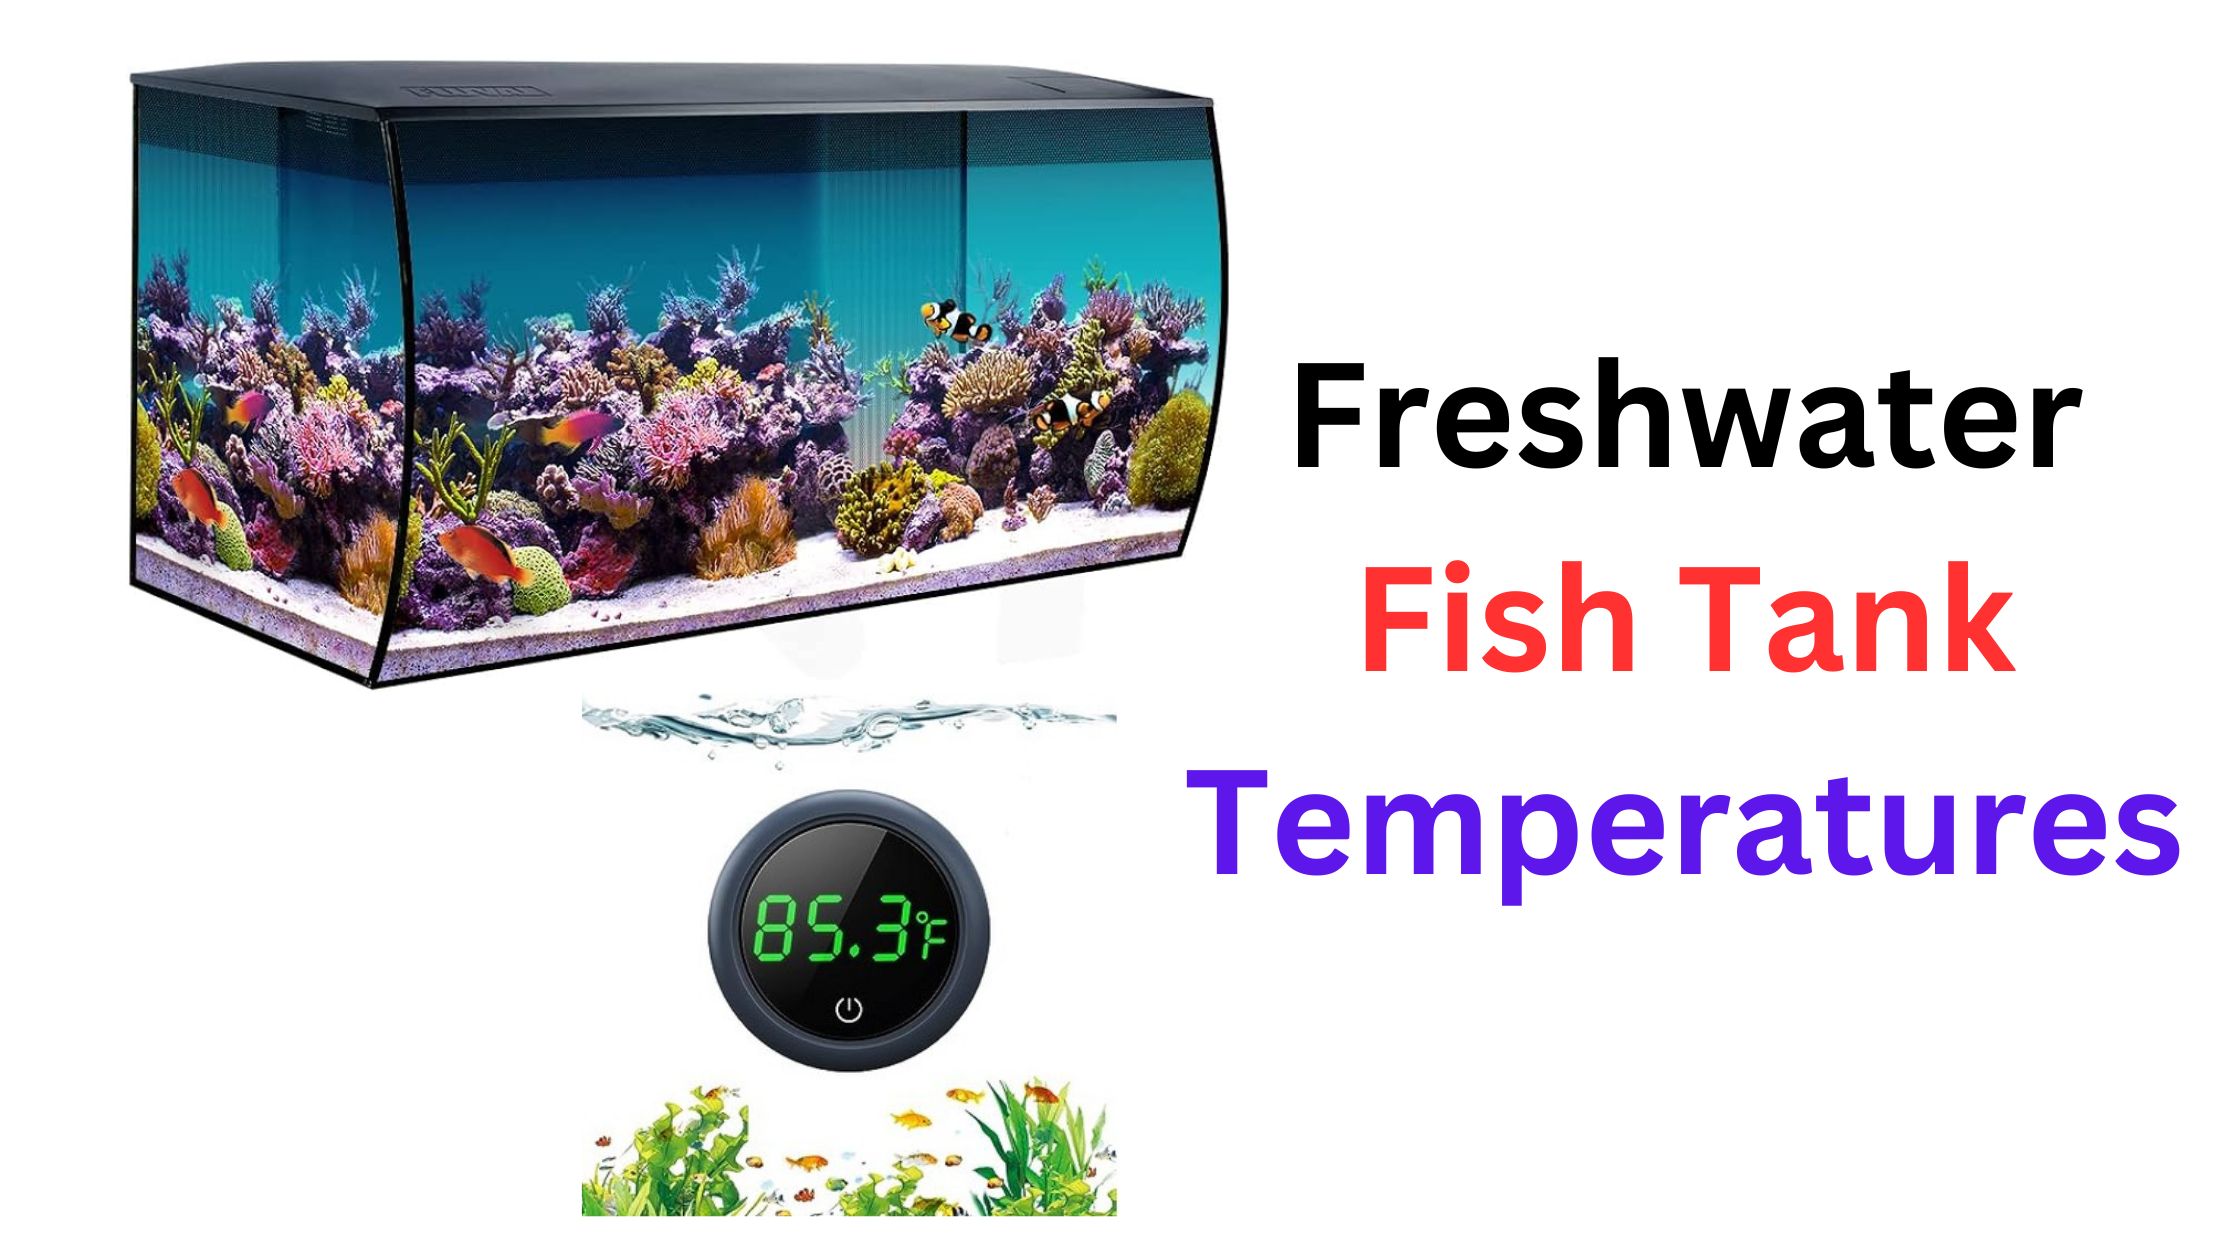 Freshwater Fish Tank Temperatures: How to Maintain & Control